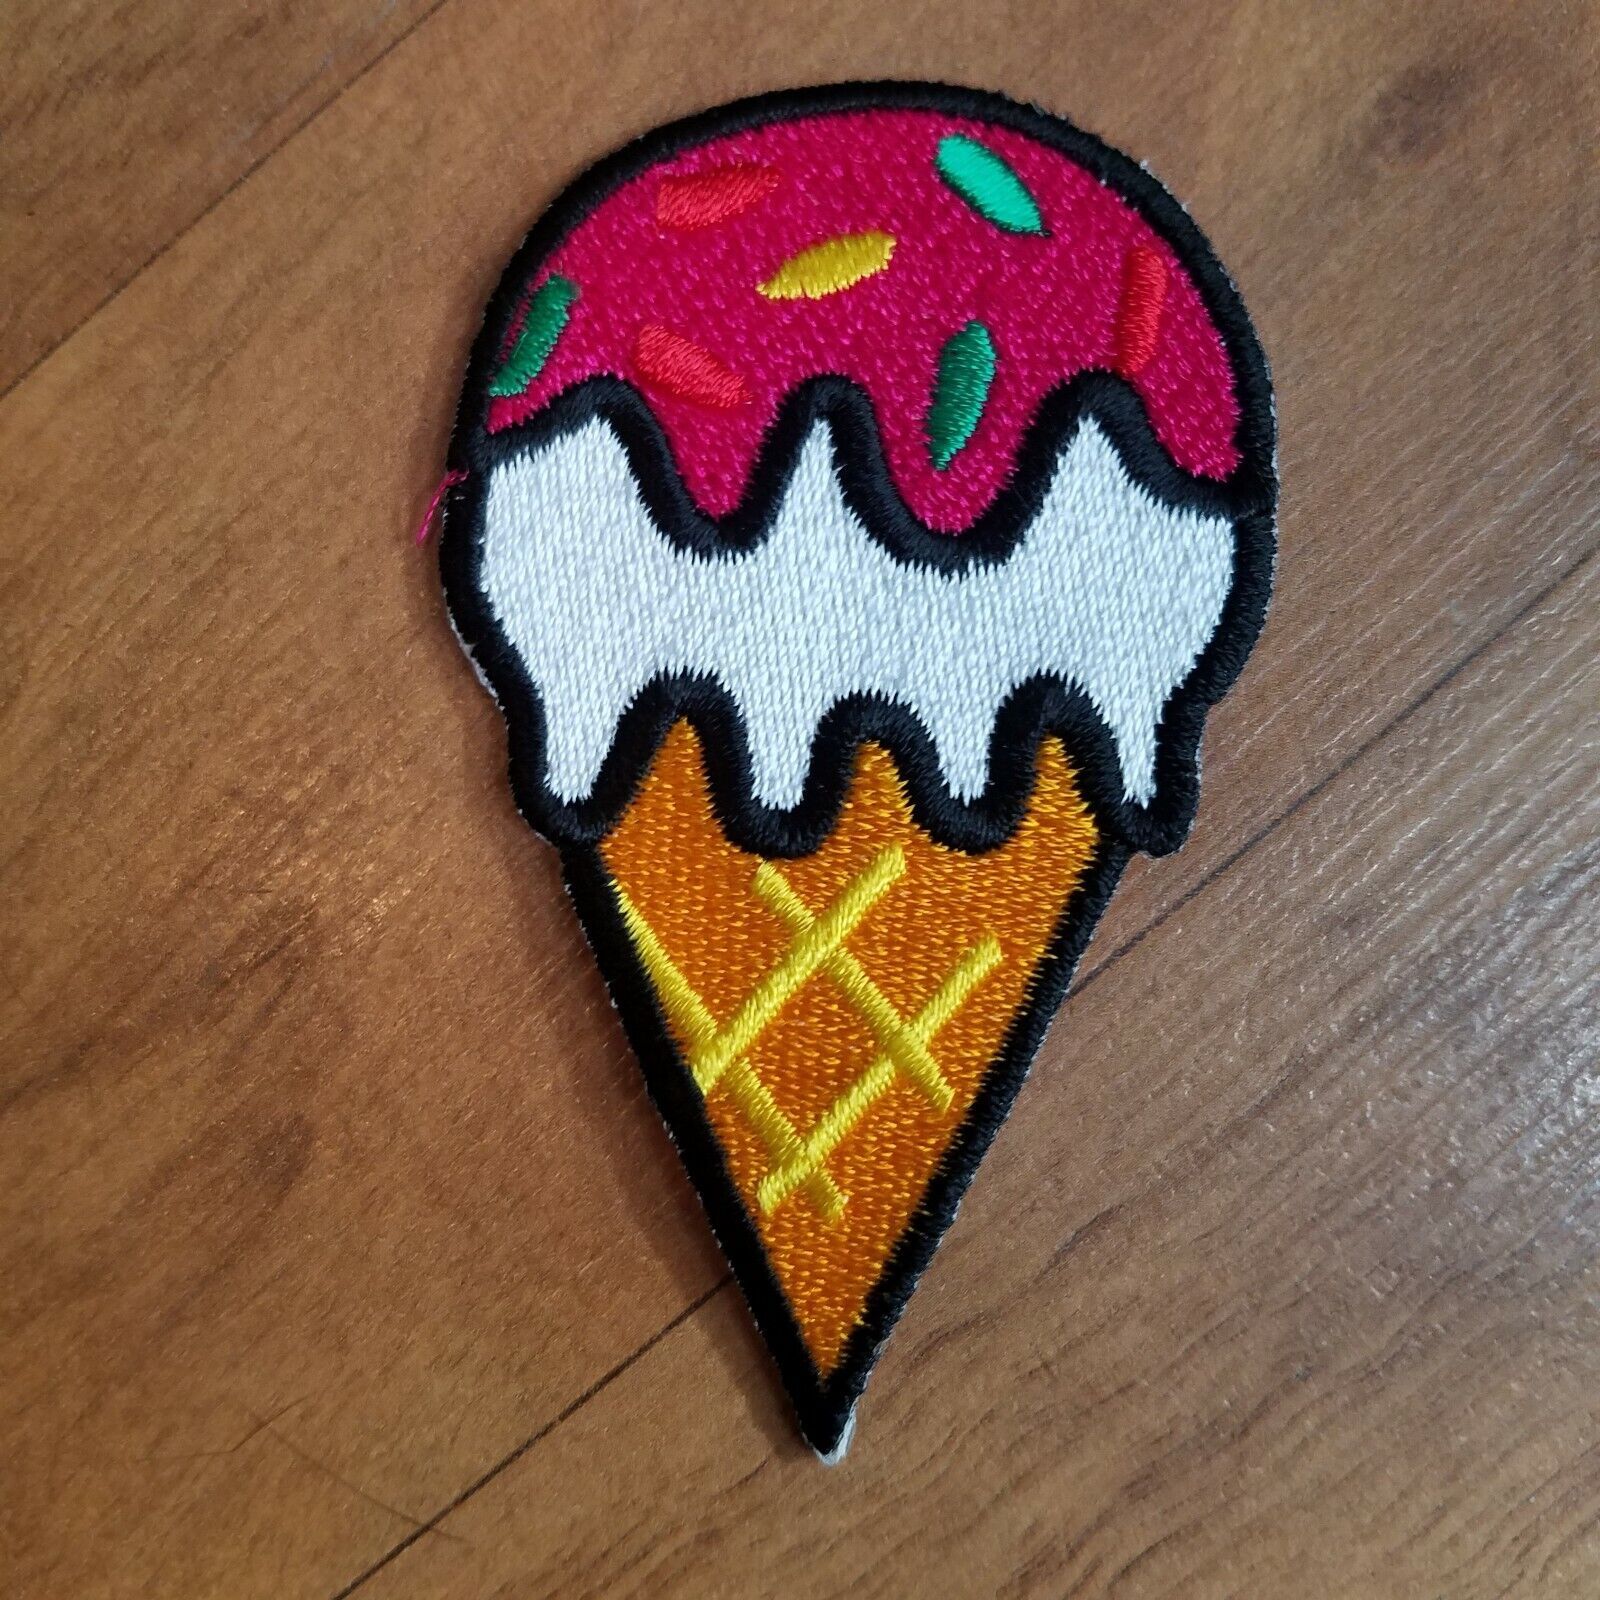 Ice cream cone w/sprinkles 3" by 2" Iron-on or Sew Embroidered Applique Patch  Без бренда